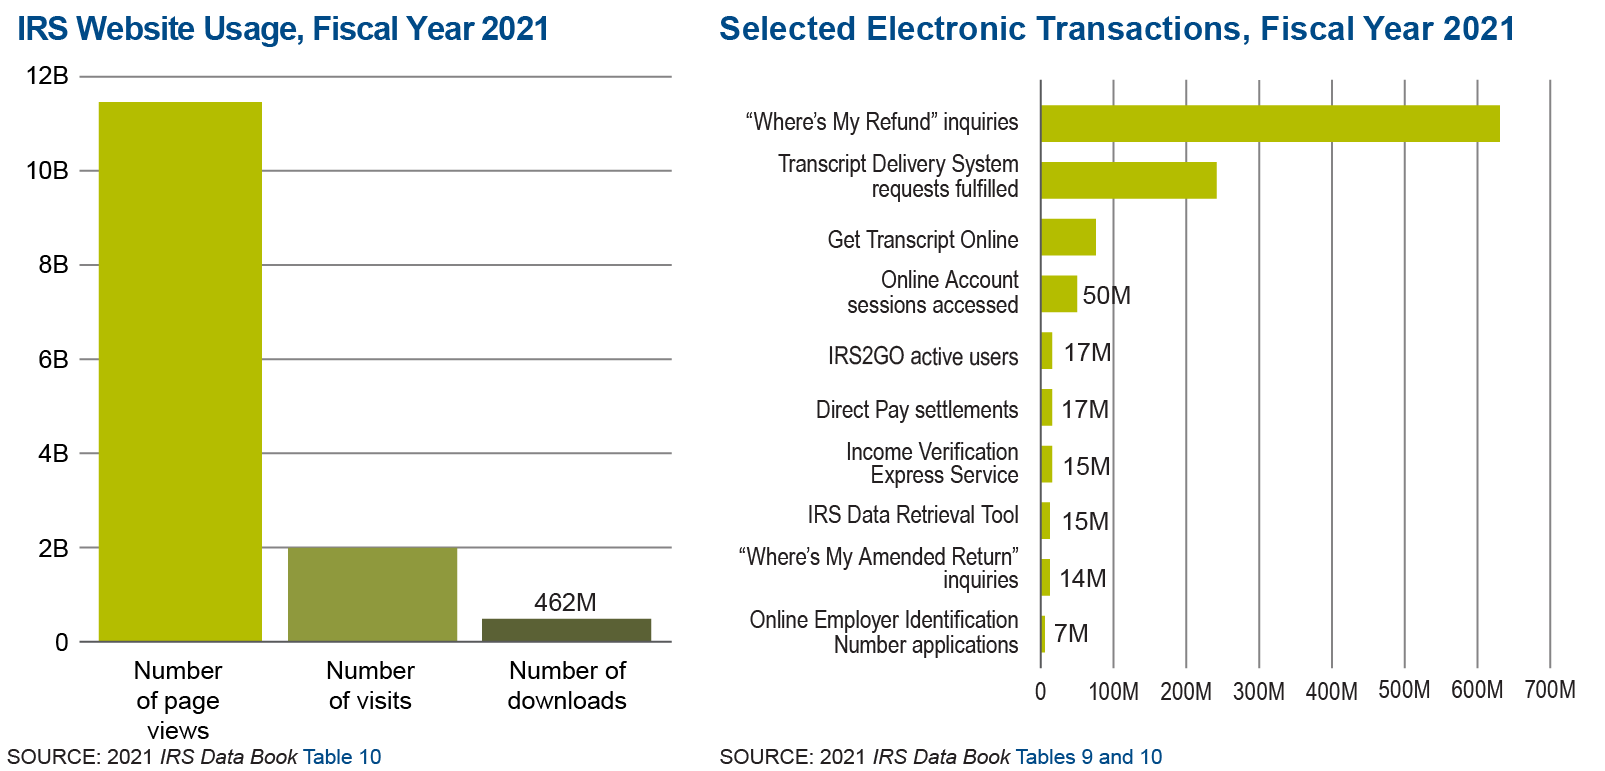 Graphic on the left shows IRS website usage for fiscal year 2021. There were almost 11.5 billion page views, nearly 2.0 billion site visits and 461.7 million downloads on IRS.gov. Graphic on the right shows the number of taxpayers using self-service features on IRS.gov during fiscal year 2021. The website received more than 632 million “Where’s My Refund?” inquiries and fulfilled almost 76 million Get Transcript Online requests.